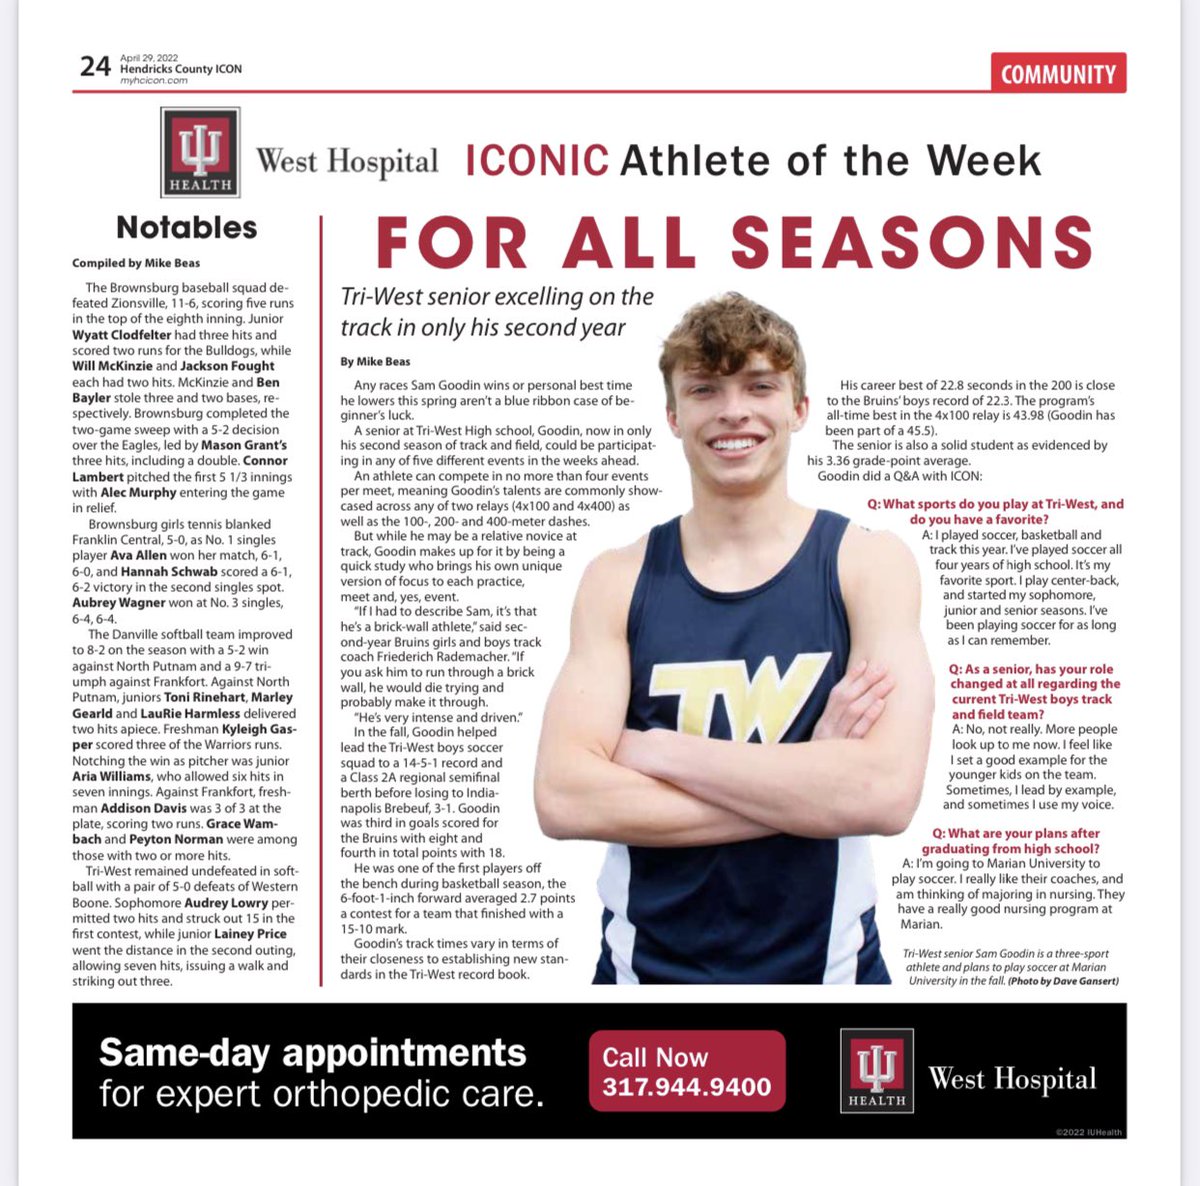 You are missing out if you haven’t seen this young man in action on the track at Tri-West this spring. Nice article about a present and future leader in @myHCICON He’ll be in action on home track again 5/5 @ 5:30pm 💪🏻 @triwestsports @TriWestTrack